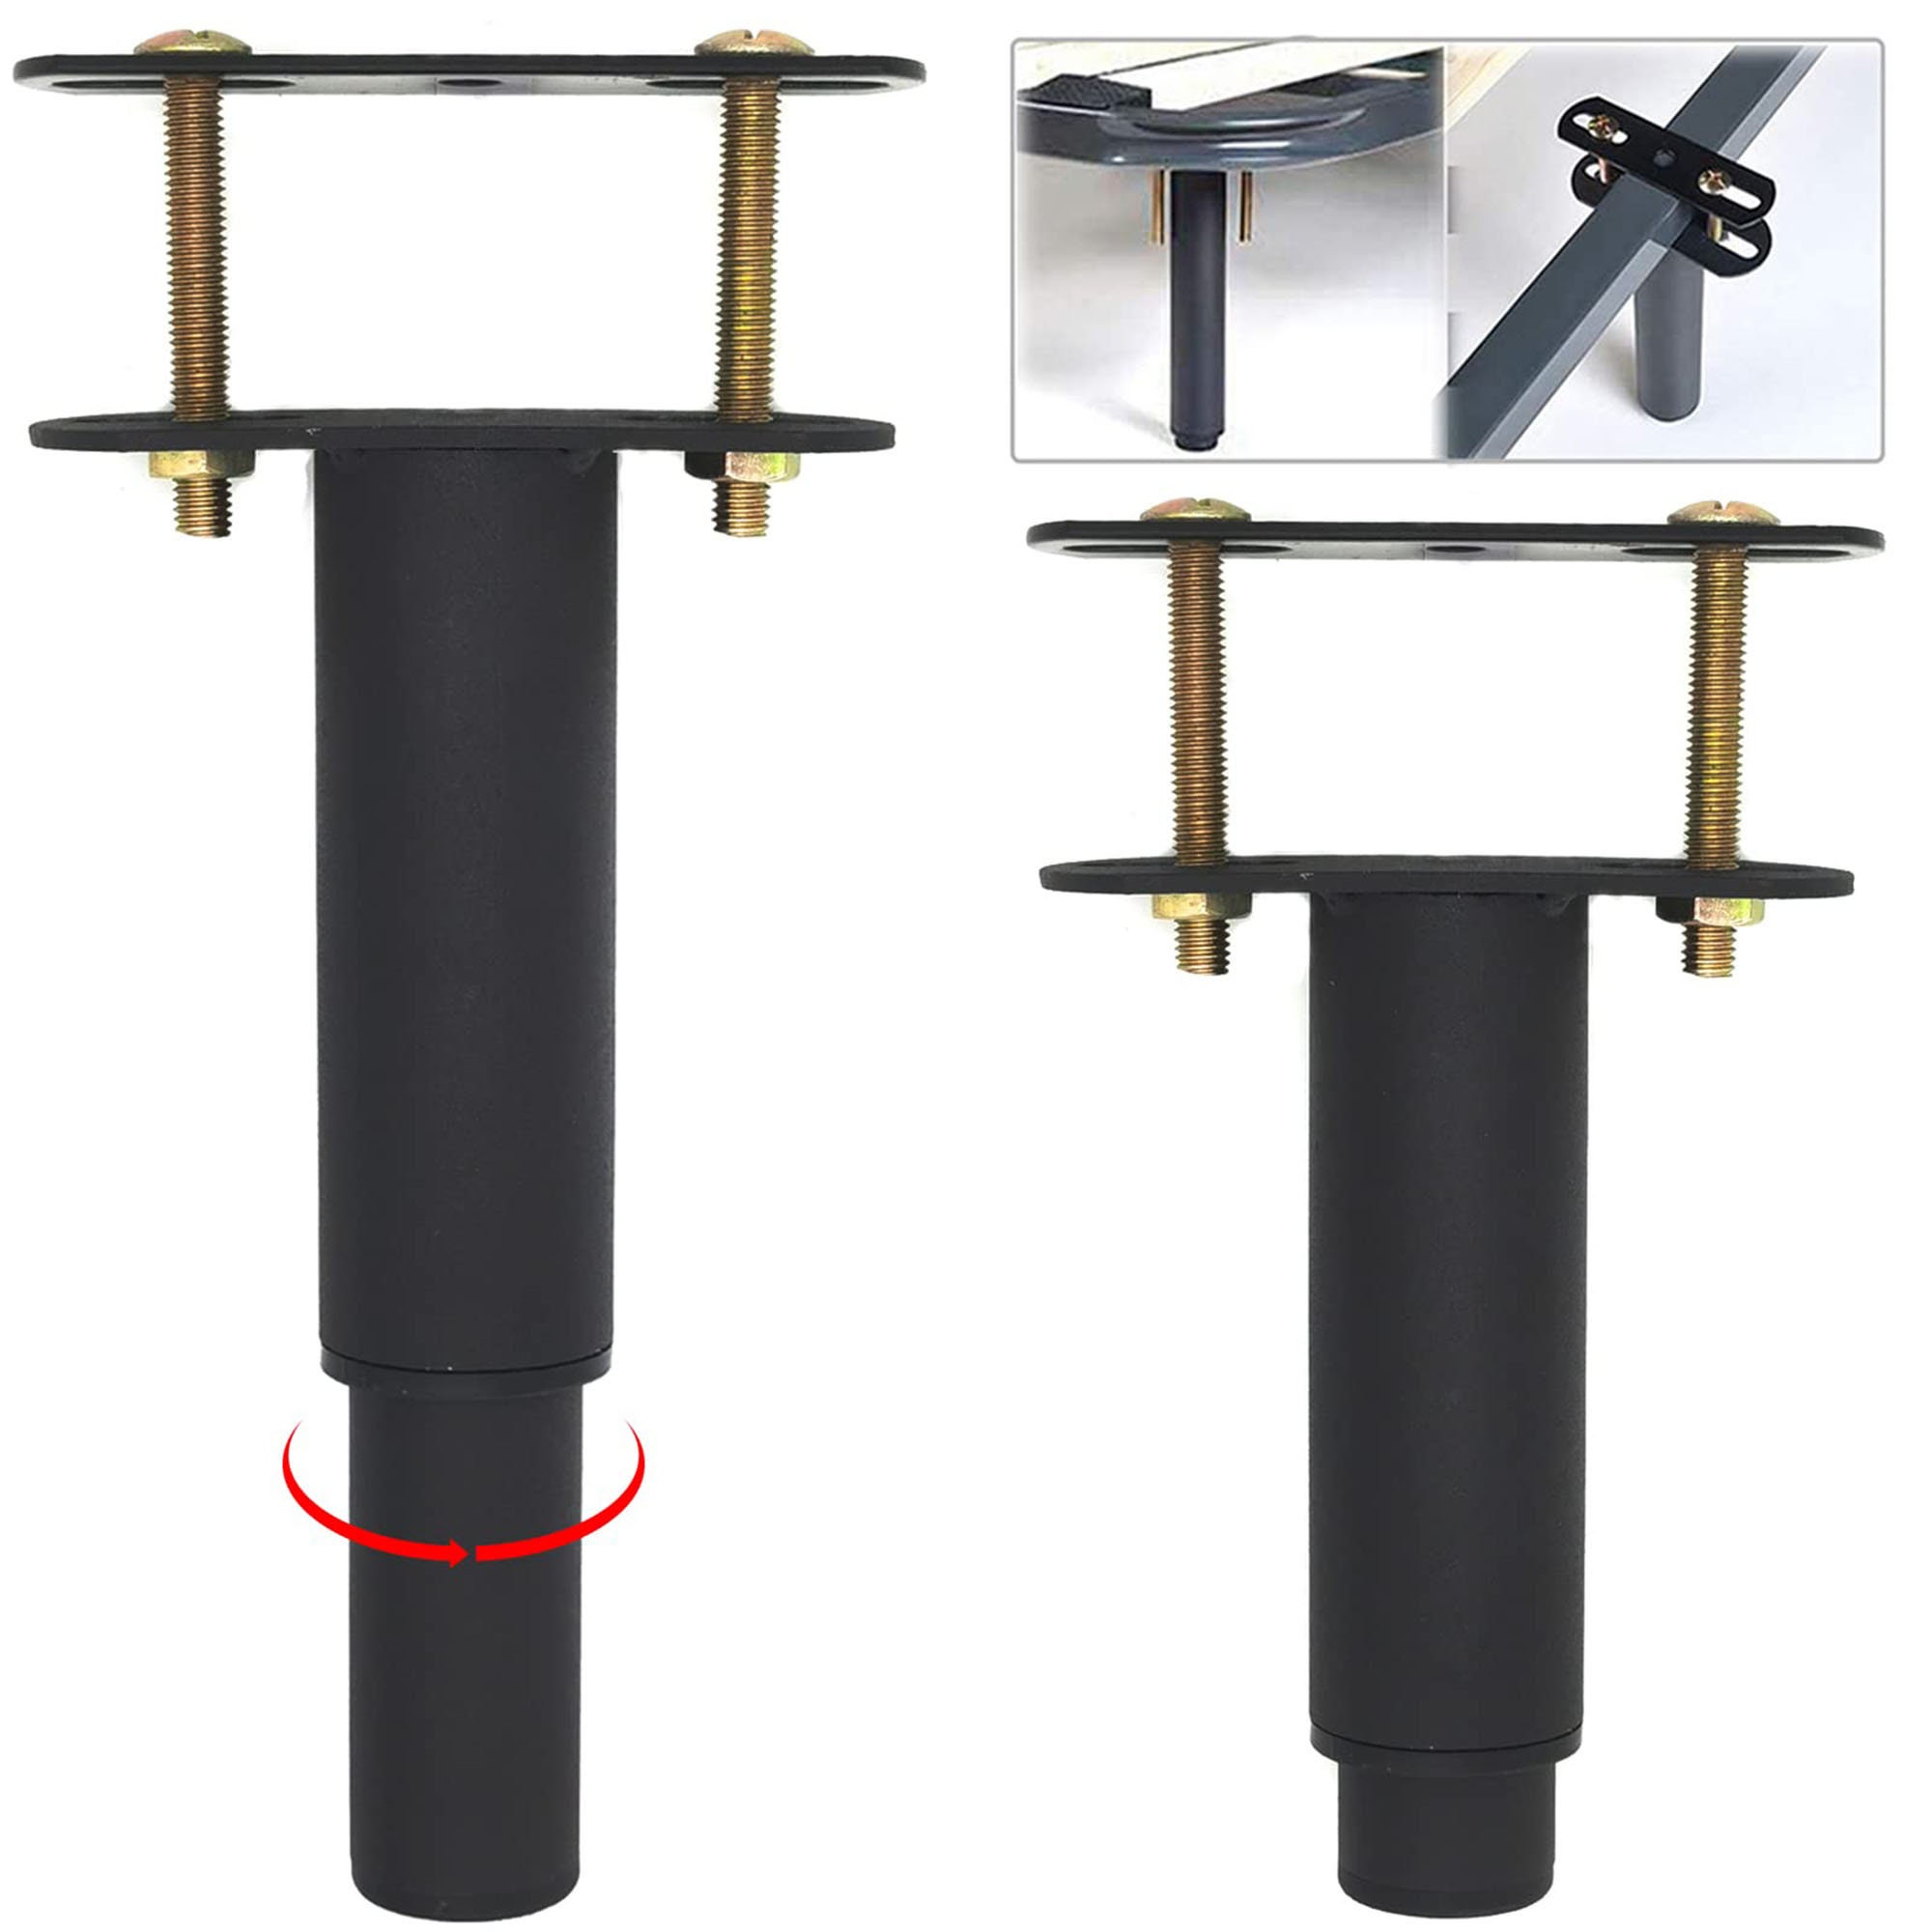 2pc/4pc Adjustable Height Center Support Leg for Bed Frame, Bed